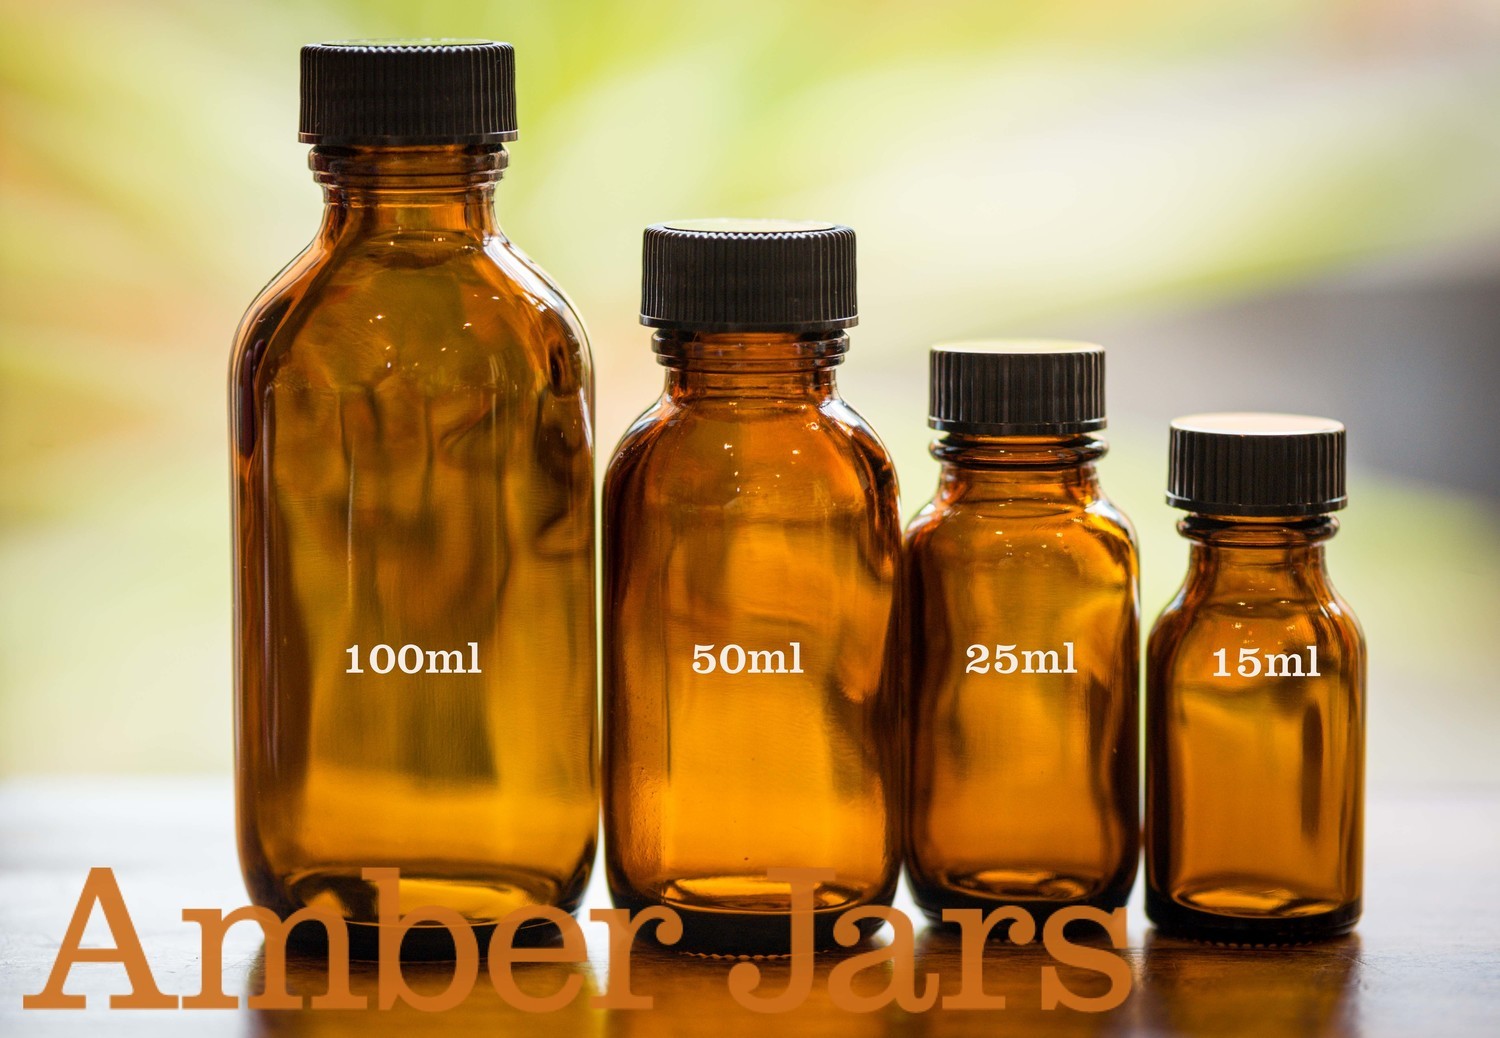 100ml Amber Glass Bottle with Black Cap - Aromatherapy, Homeopathy, Natural Medicine